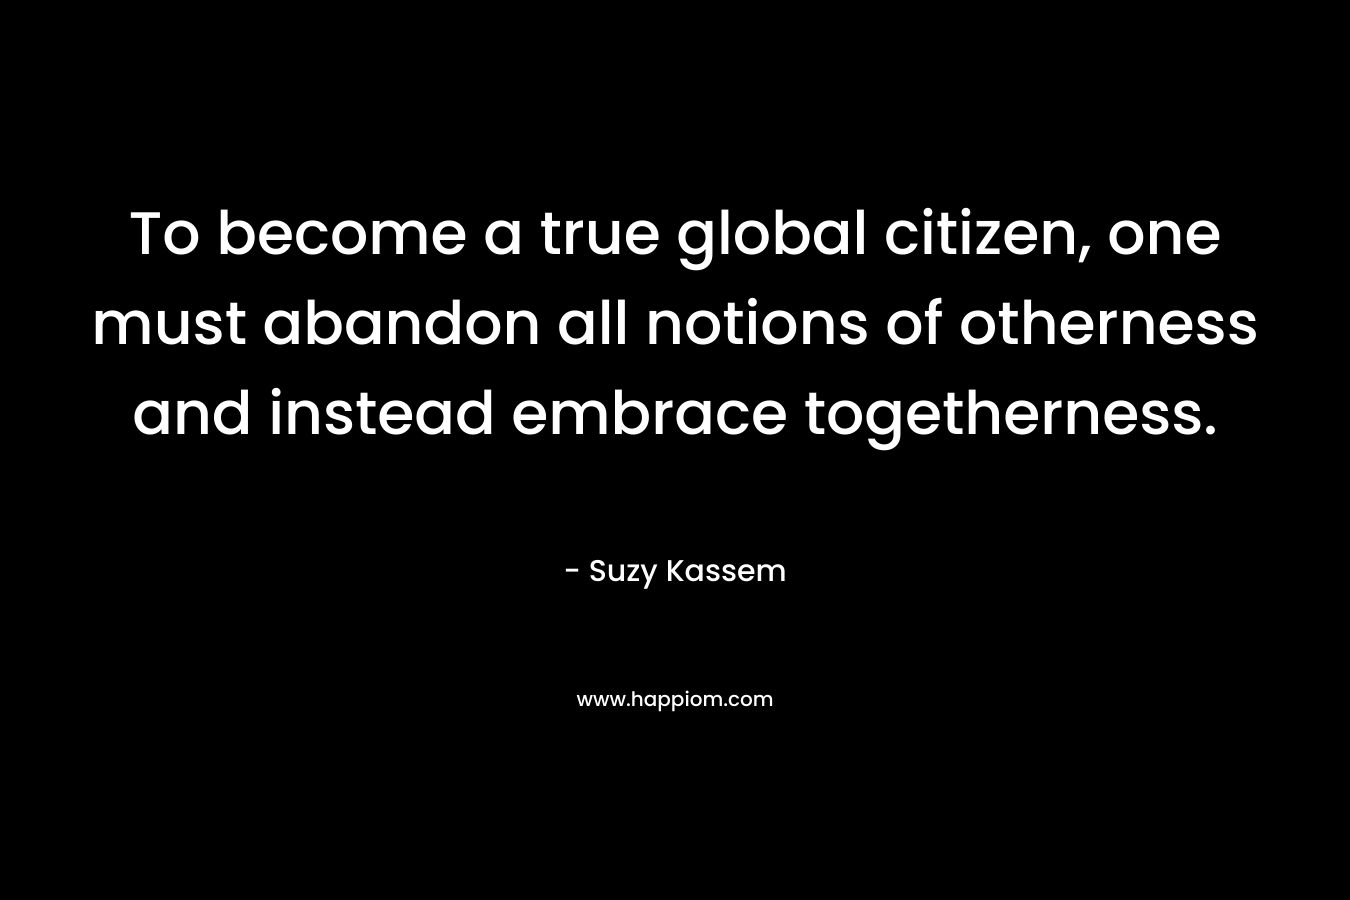 To become a true global citizen, one must abandon all notions of otherness and instead embrace togetherness. – Suzy Kassem